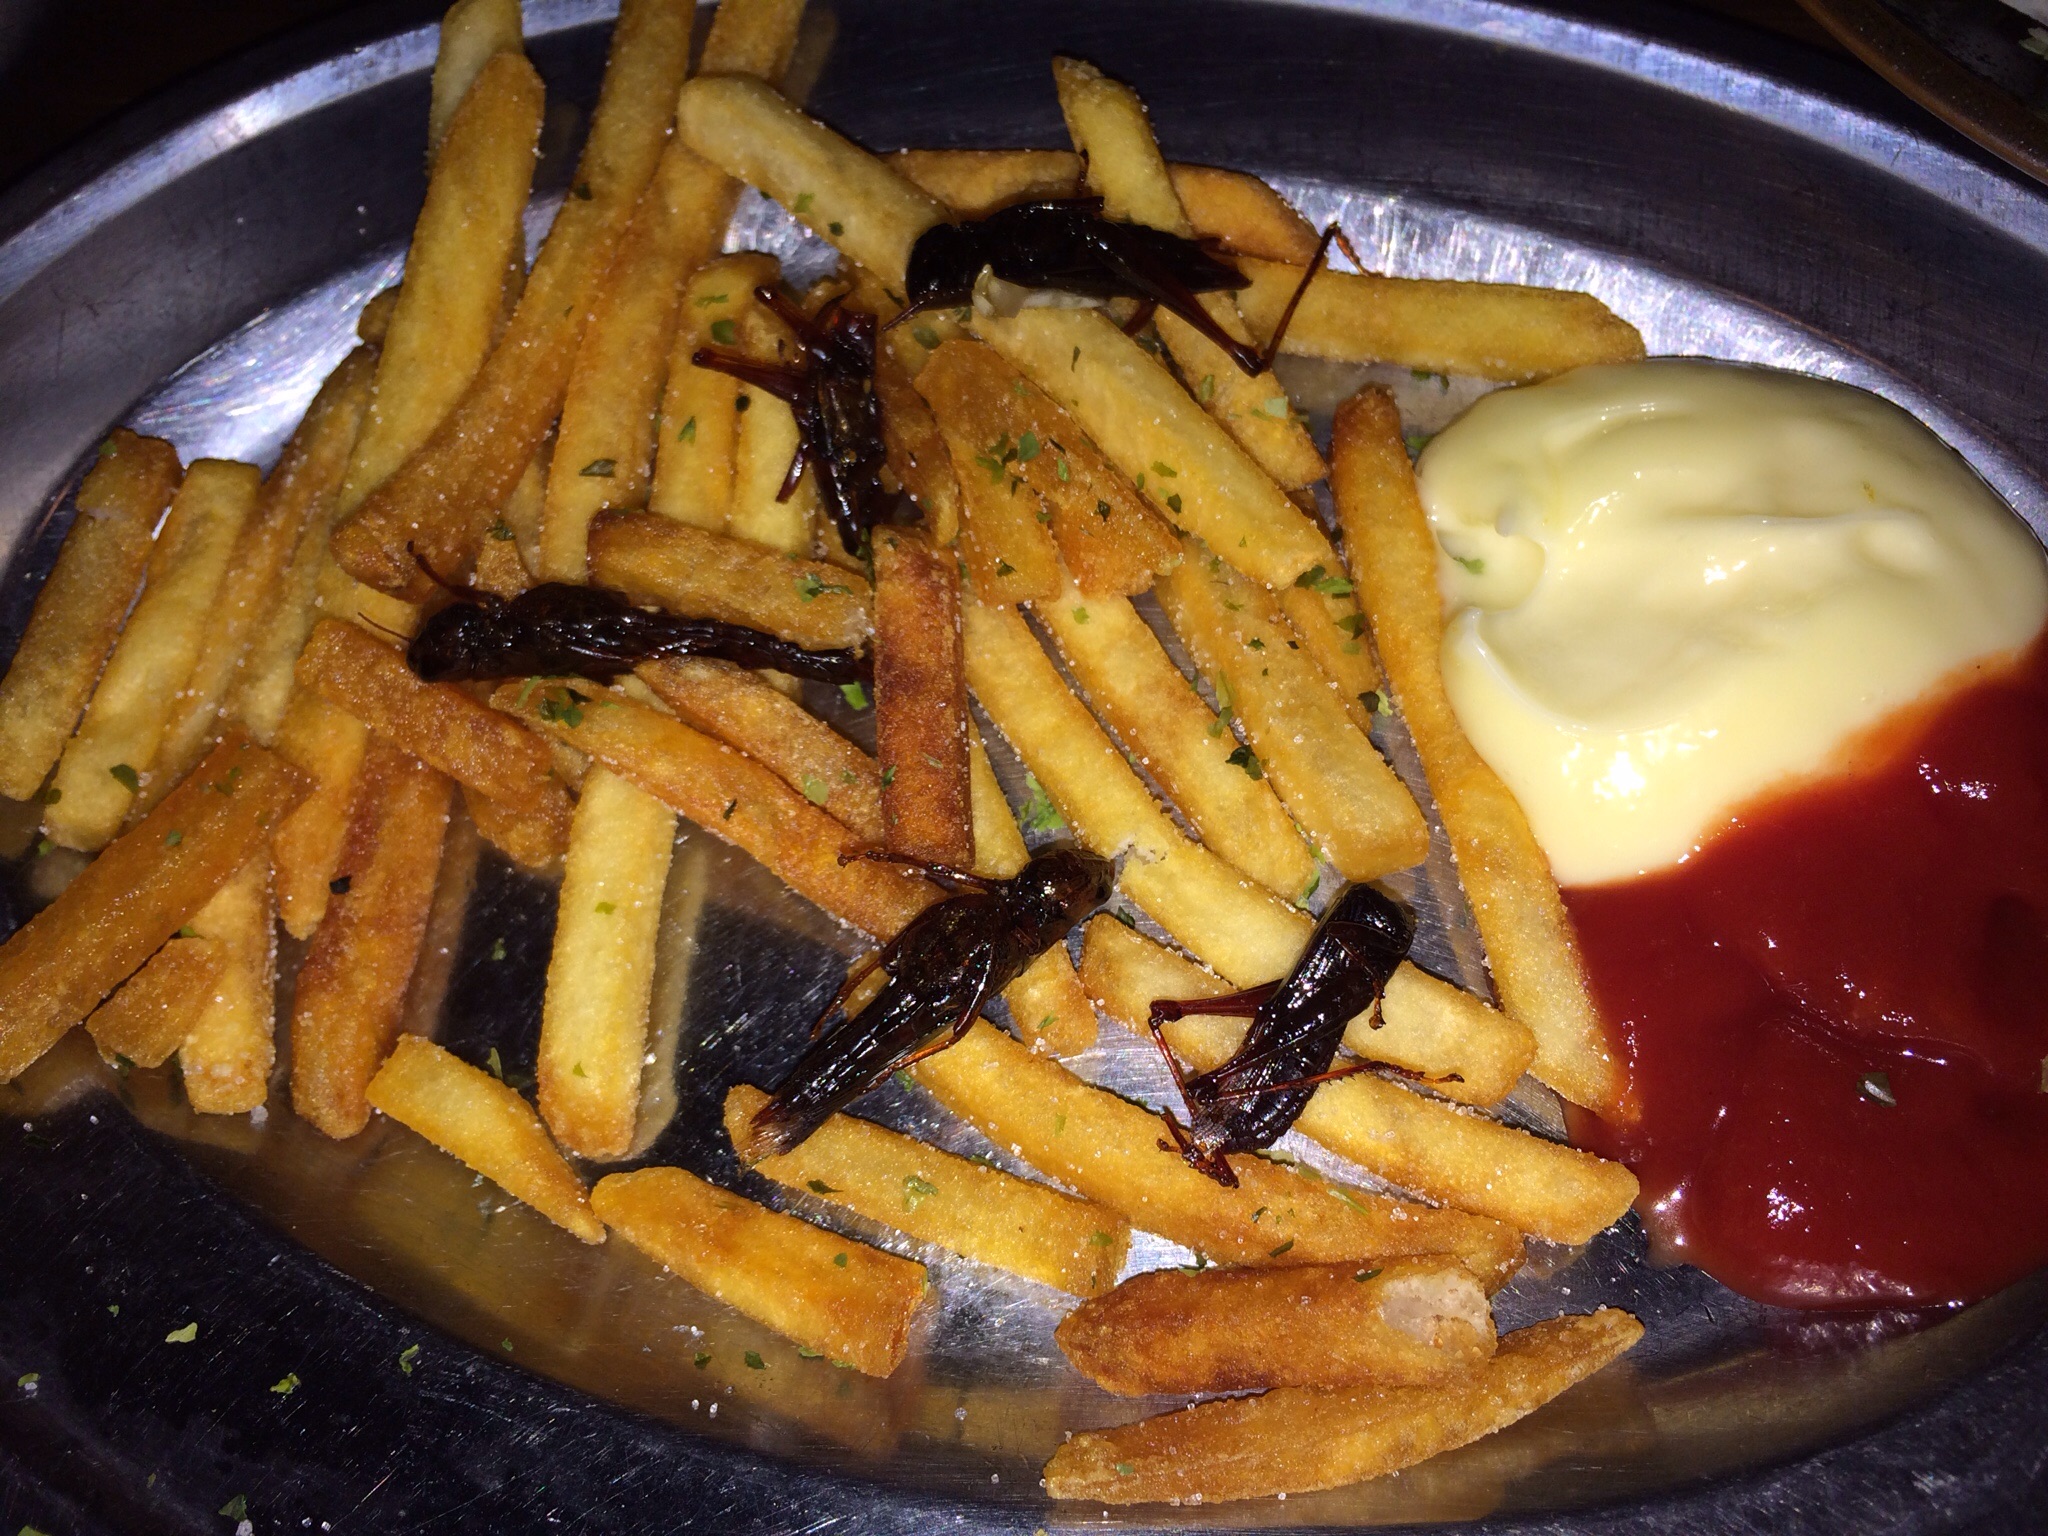 Fries garnished with inago